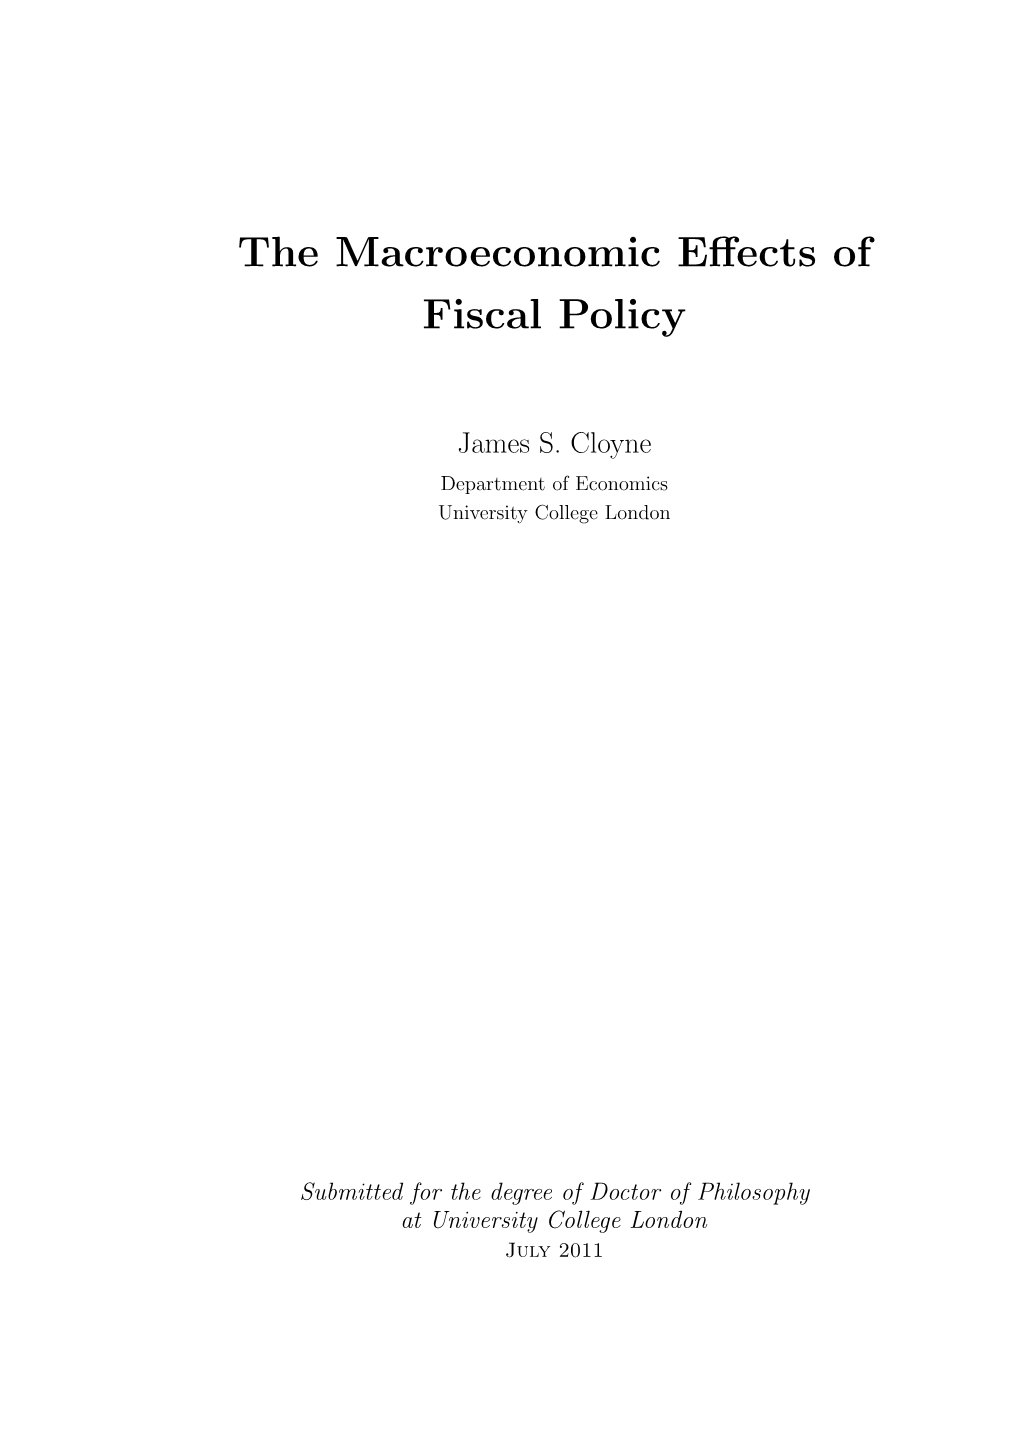 The Macroeconomic Effects of Fiscal Policy